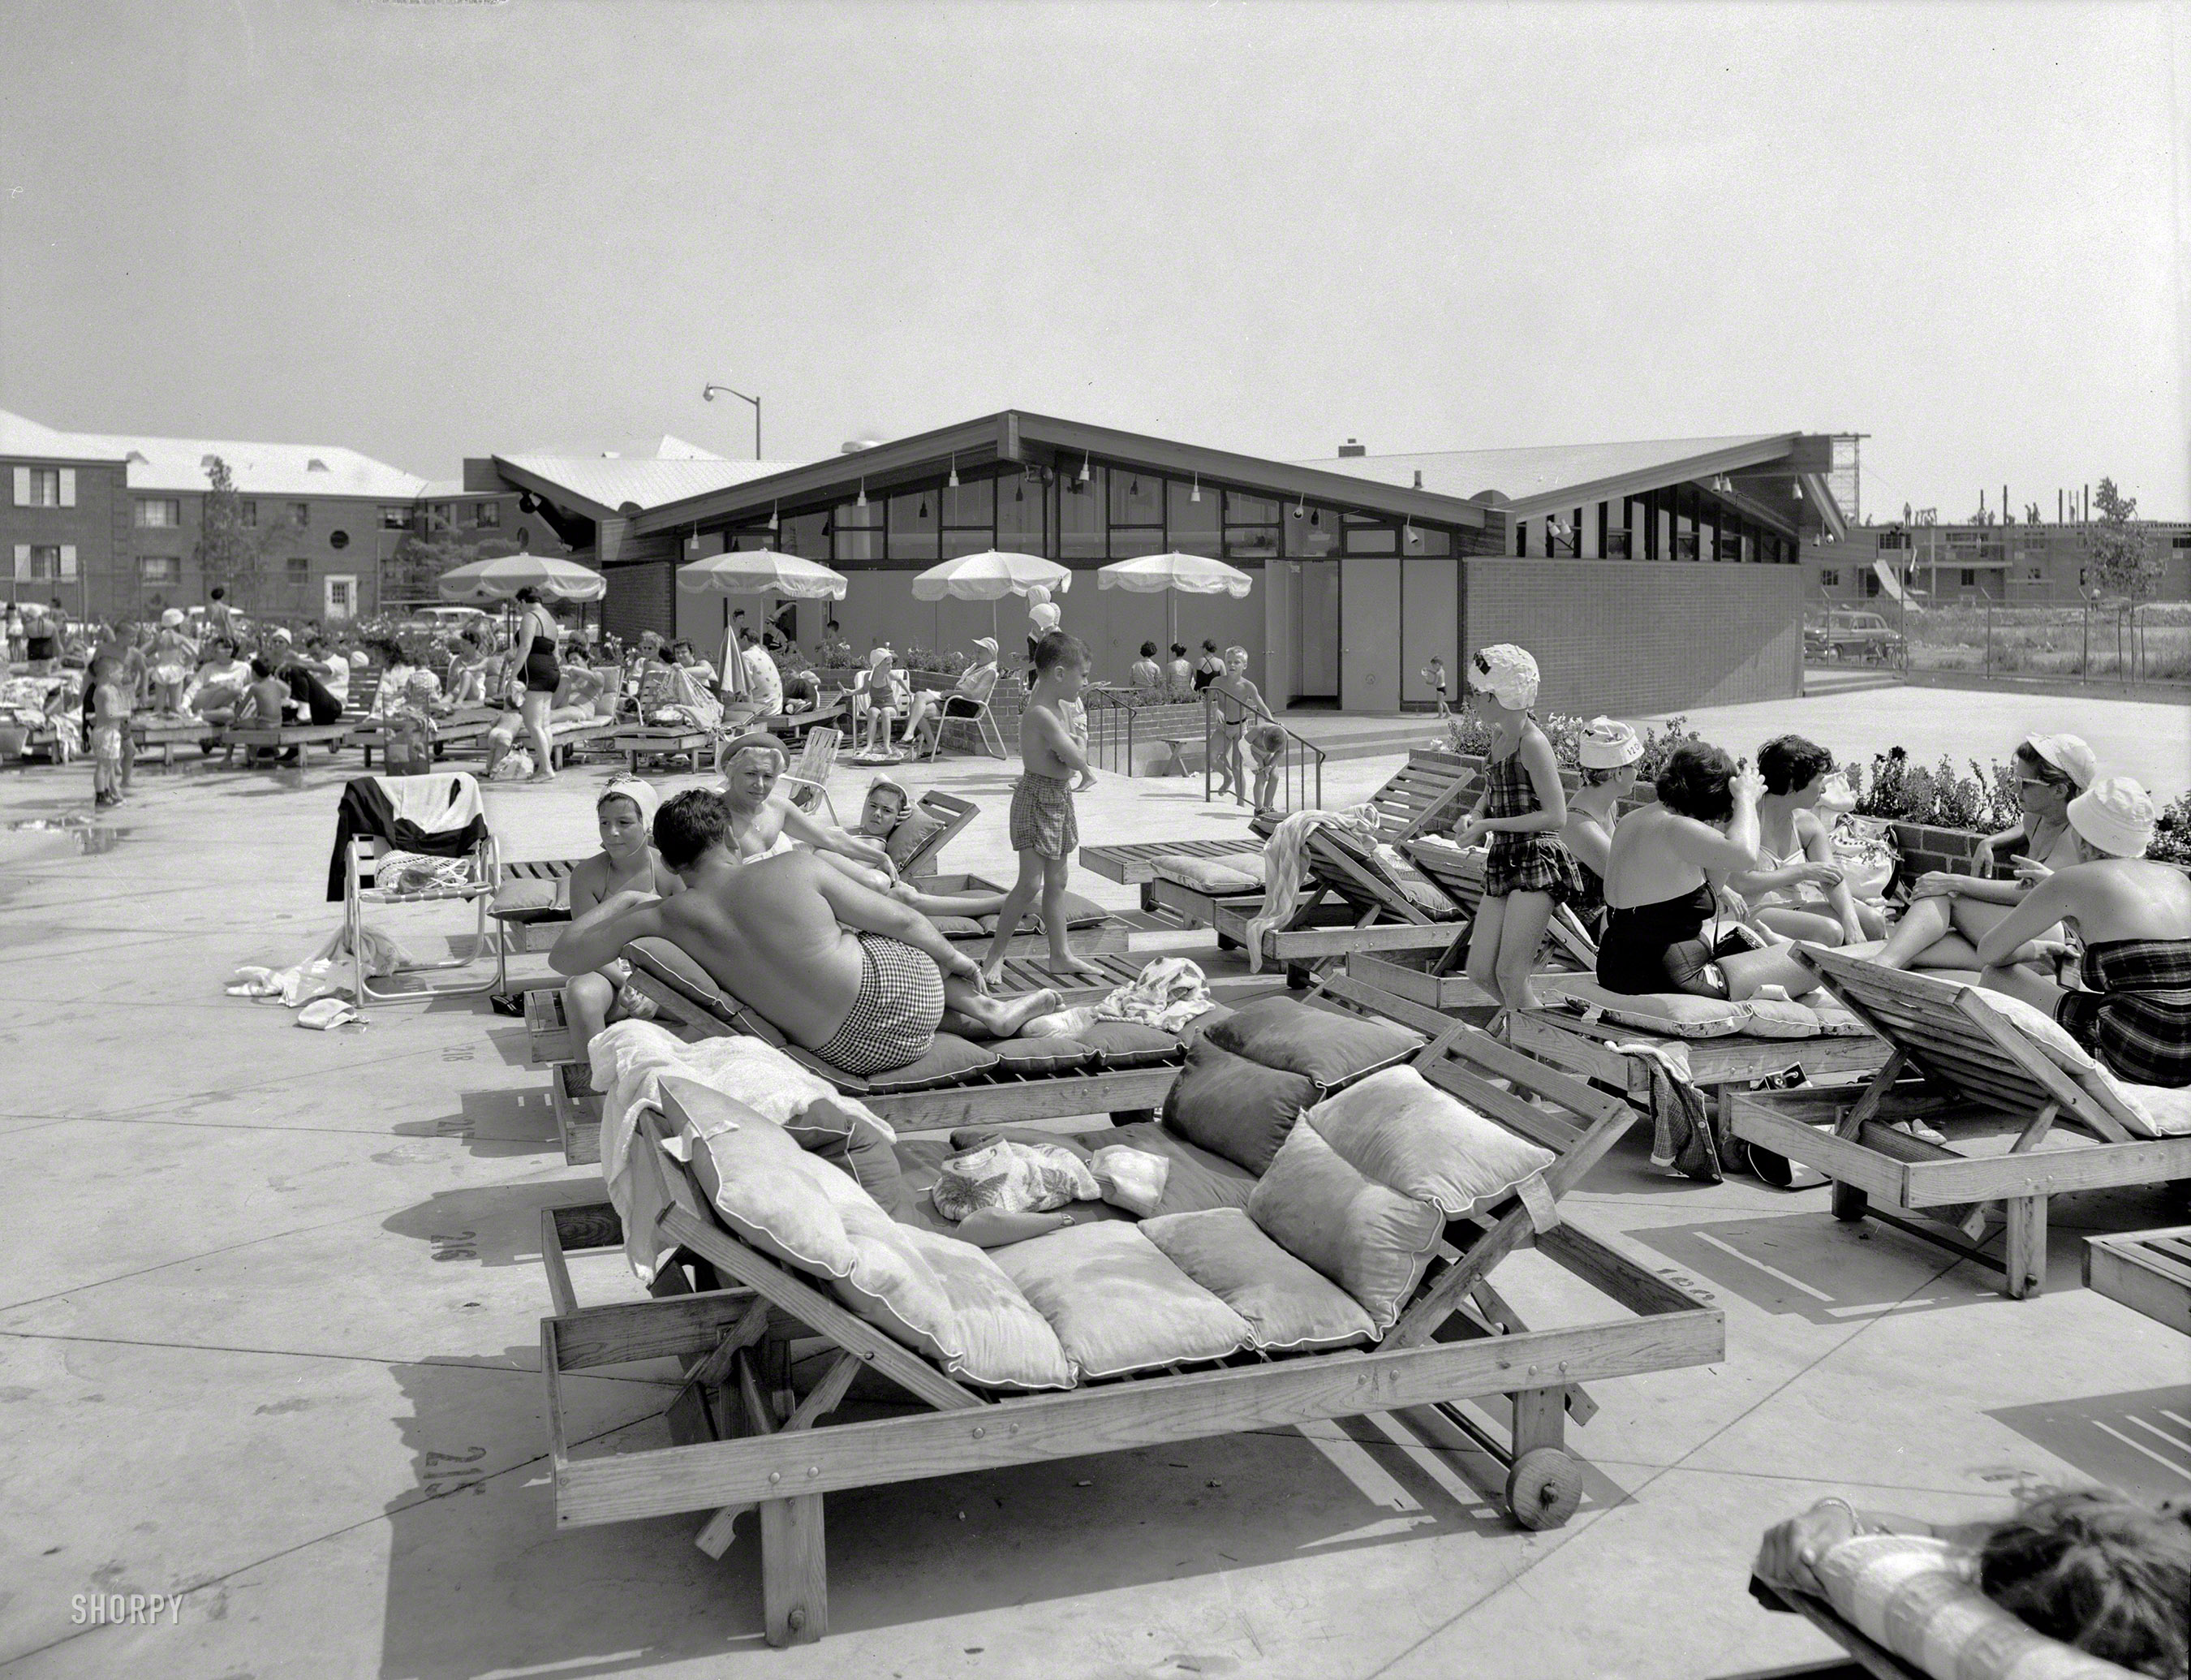 August 19, 1959. "Linden Woods Swim Club, Howard Beach, Queens. View to clubhouse. Lapidus, Kornblath, Harle & Liebman, client." Milton, honey. Bring me a Pepsi. And a pack of Salems. Gottscho-Schleisner photo. View full size.